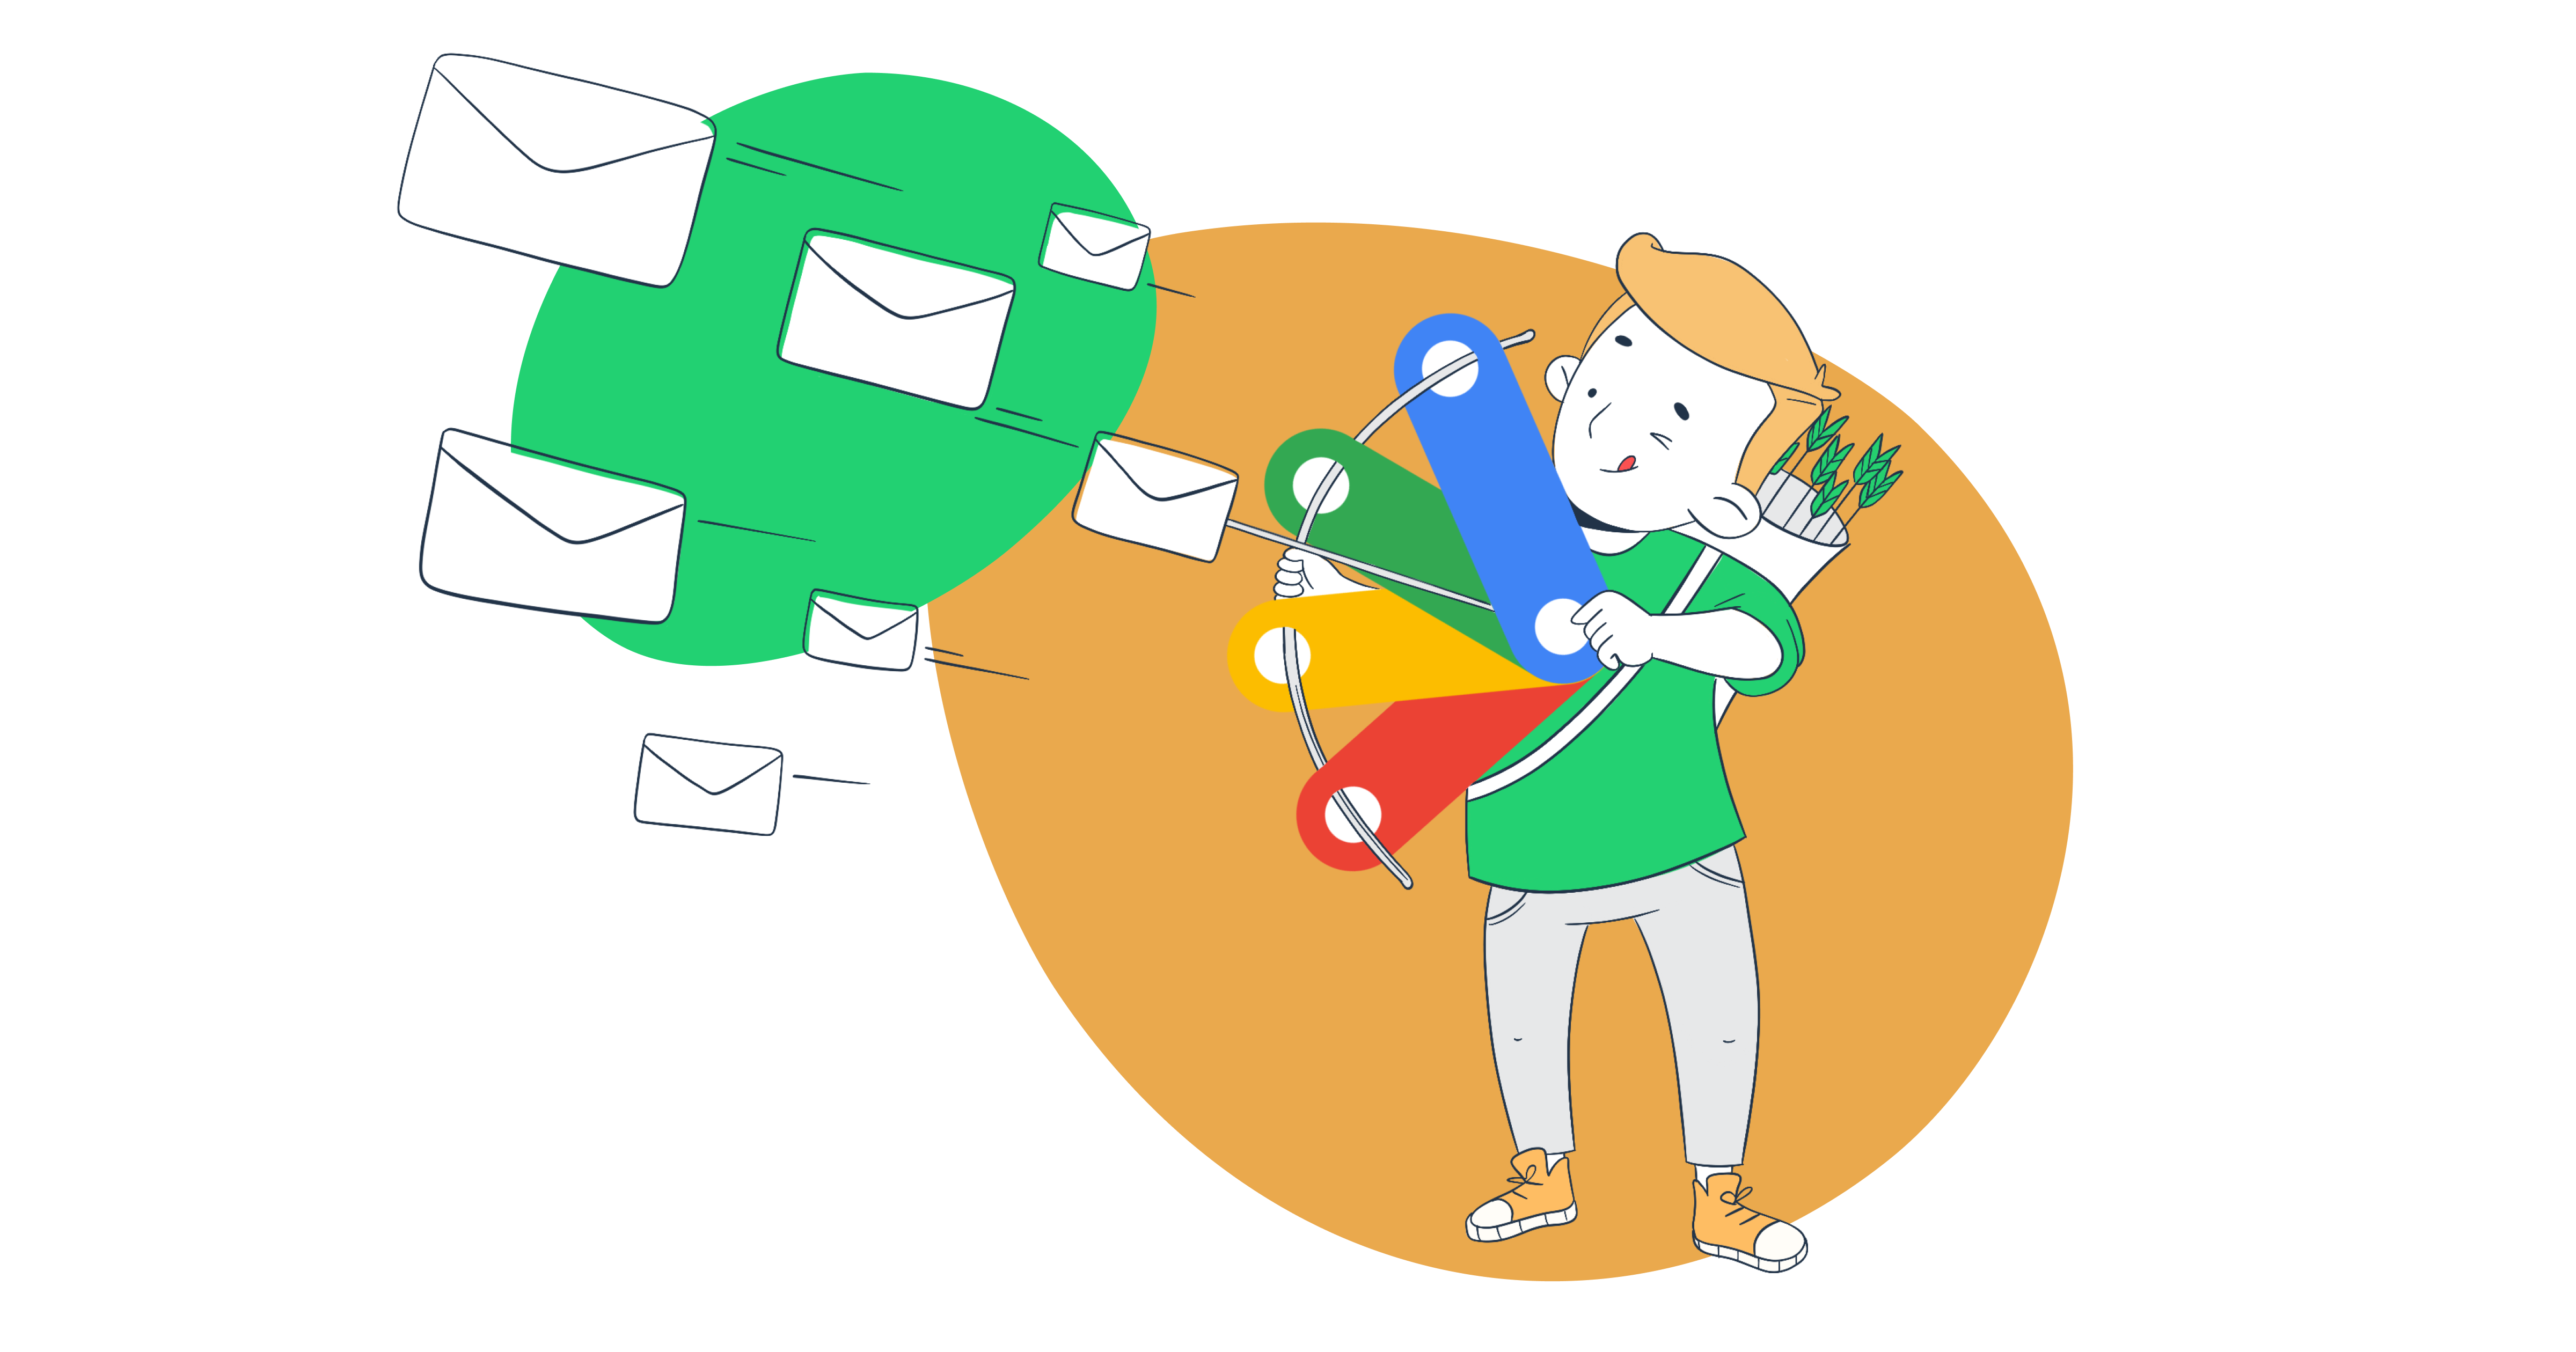 This is a featured image for an article on sending emails with Google Apps Script